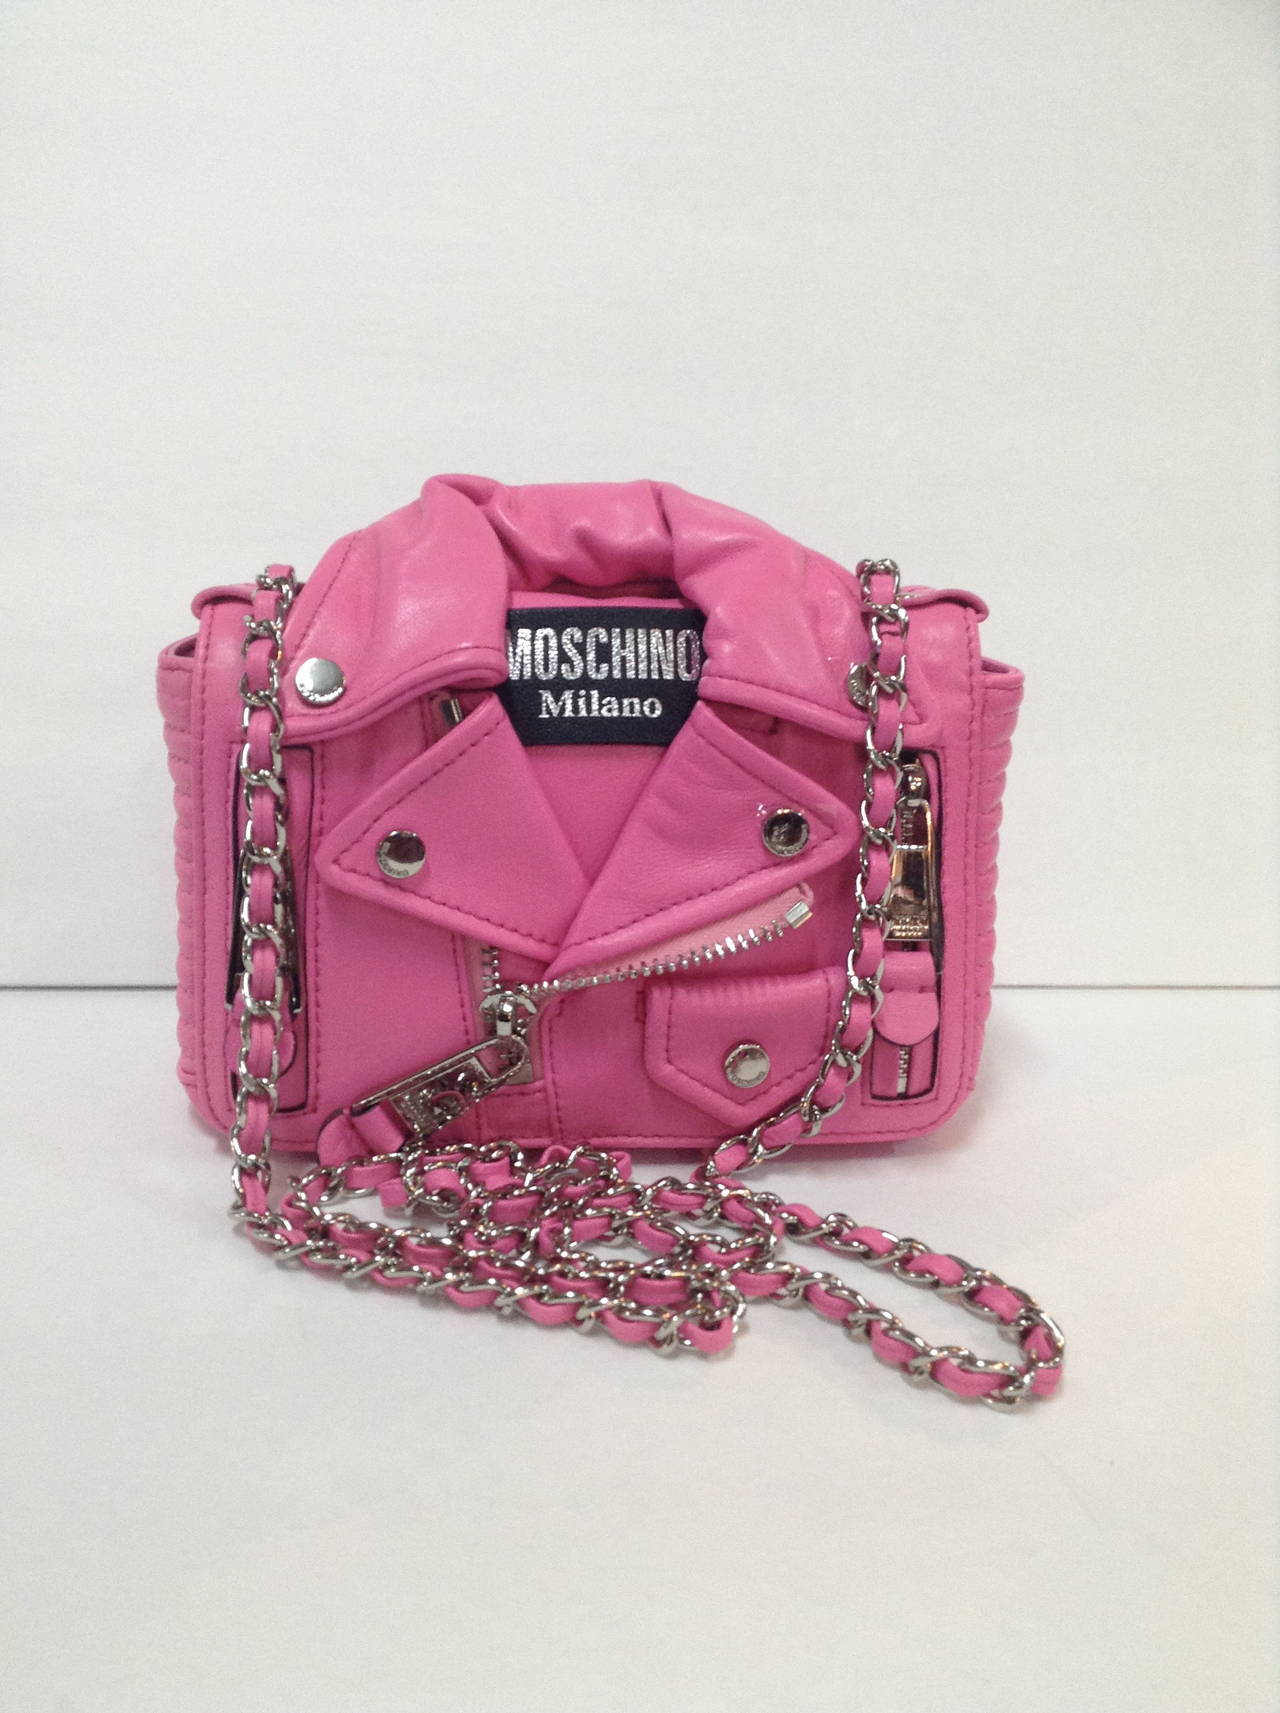 Authentic sold out 2014 Pink Moschino Mini Leather Biker Shoulder Bag. Adjustable metal chain and leather shoulder straps.

Front flap with snap button closure
Two front zip pockets
One internal leather patch pocket
Silver colored metal